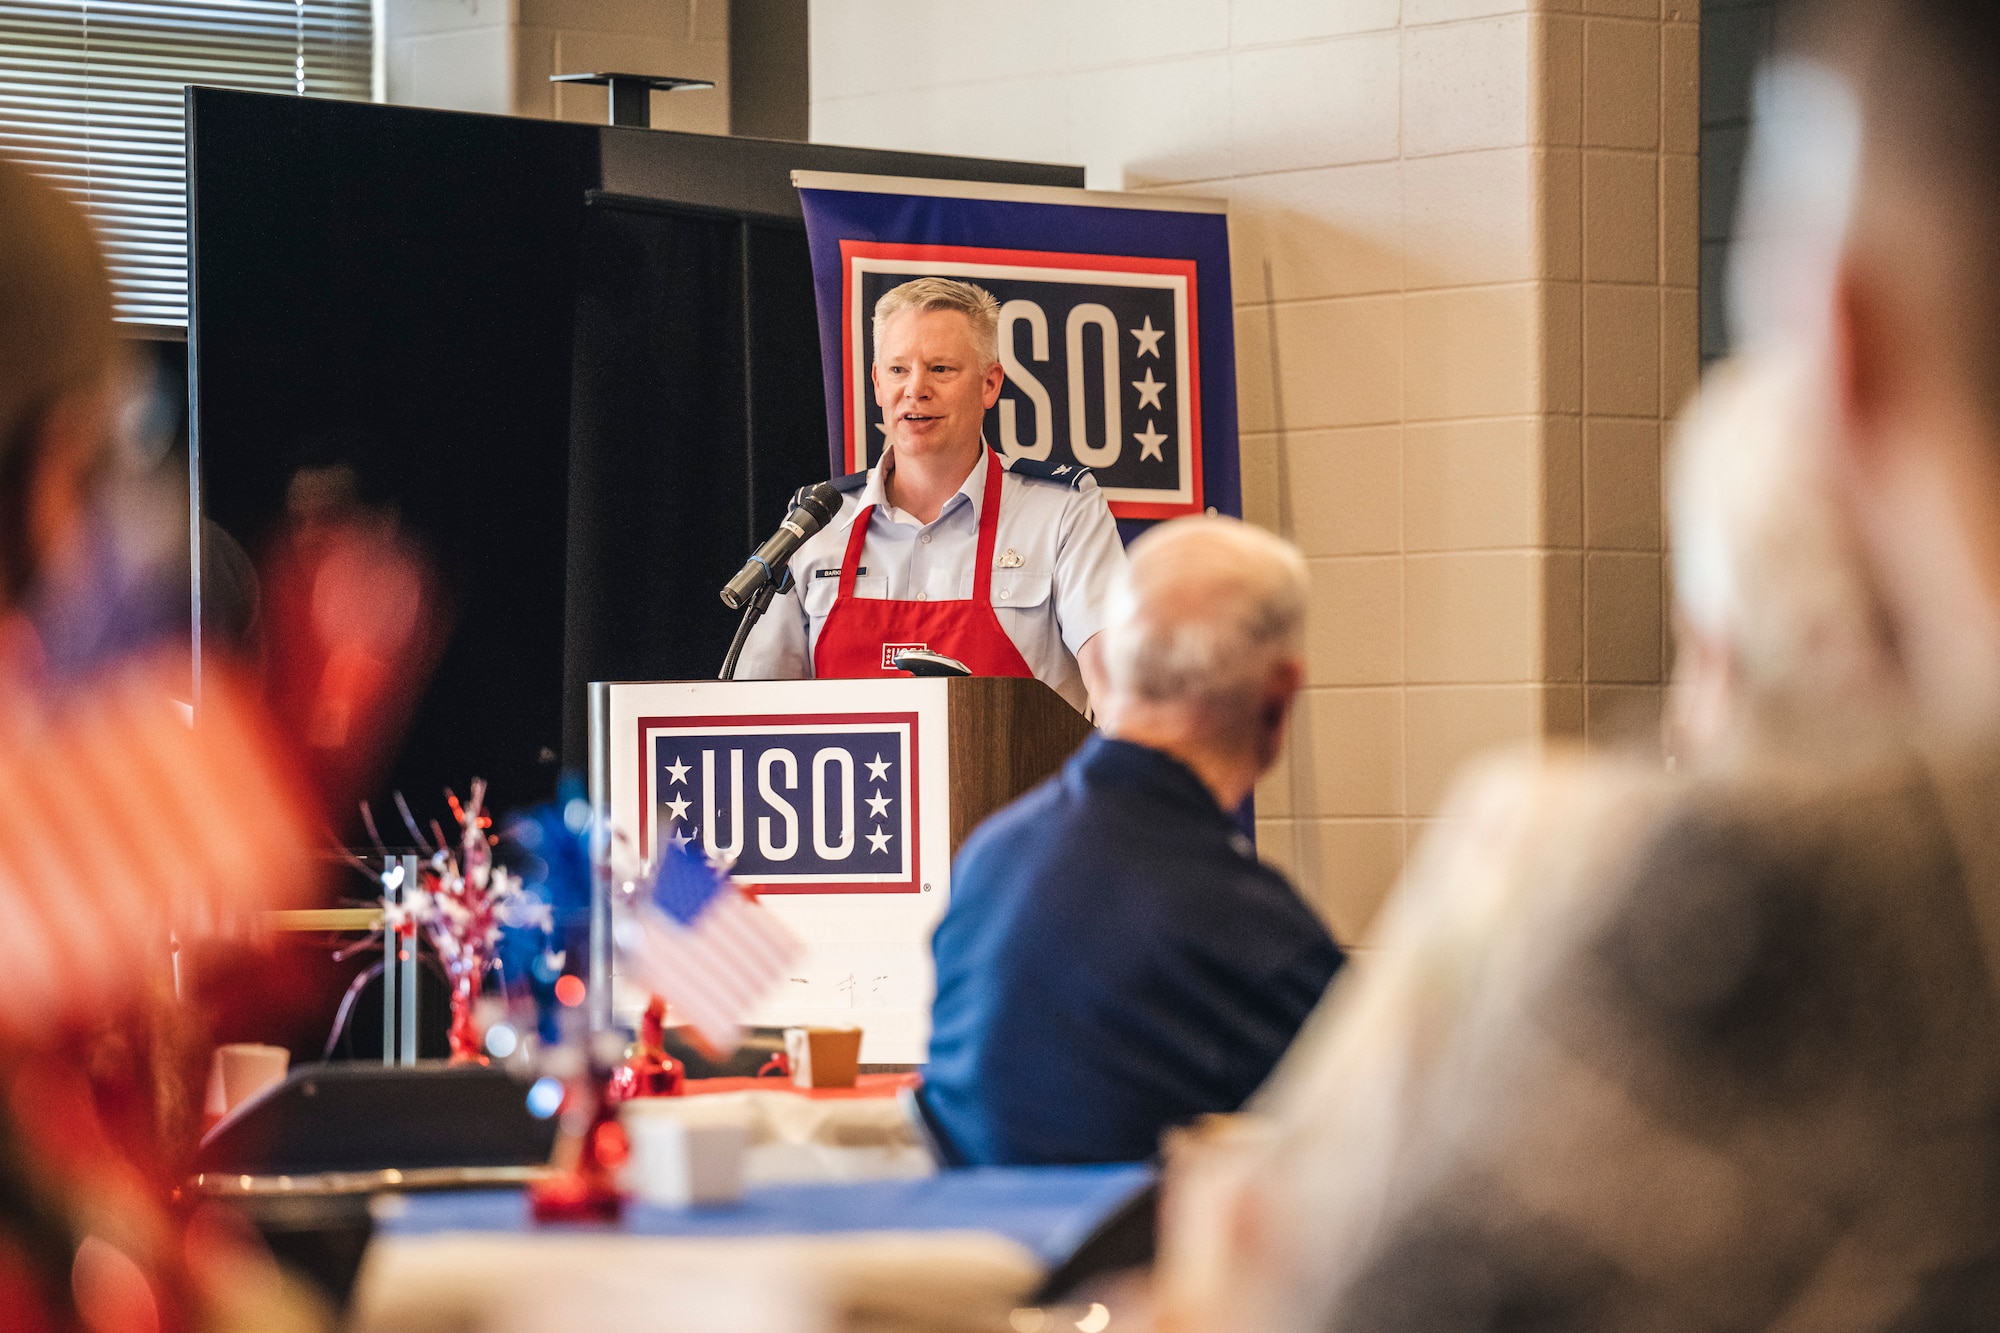 Col. Charles Barkhurst, 88th Air Base Wing vice commander, speaks during the annual USO volunteer appreciation dinner at Wright-Patterson Air Force Base, Ohio, April 20.